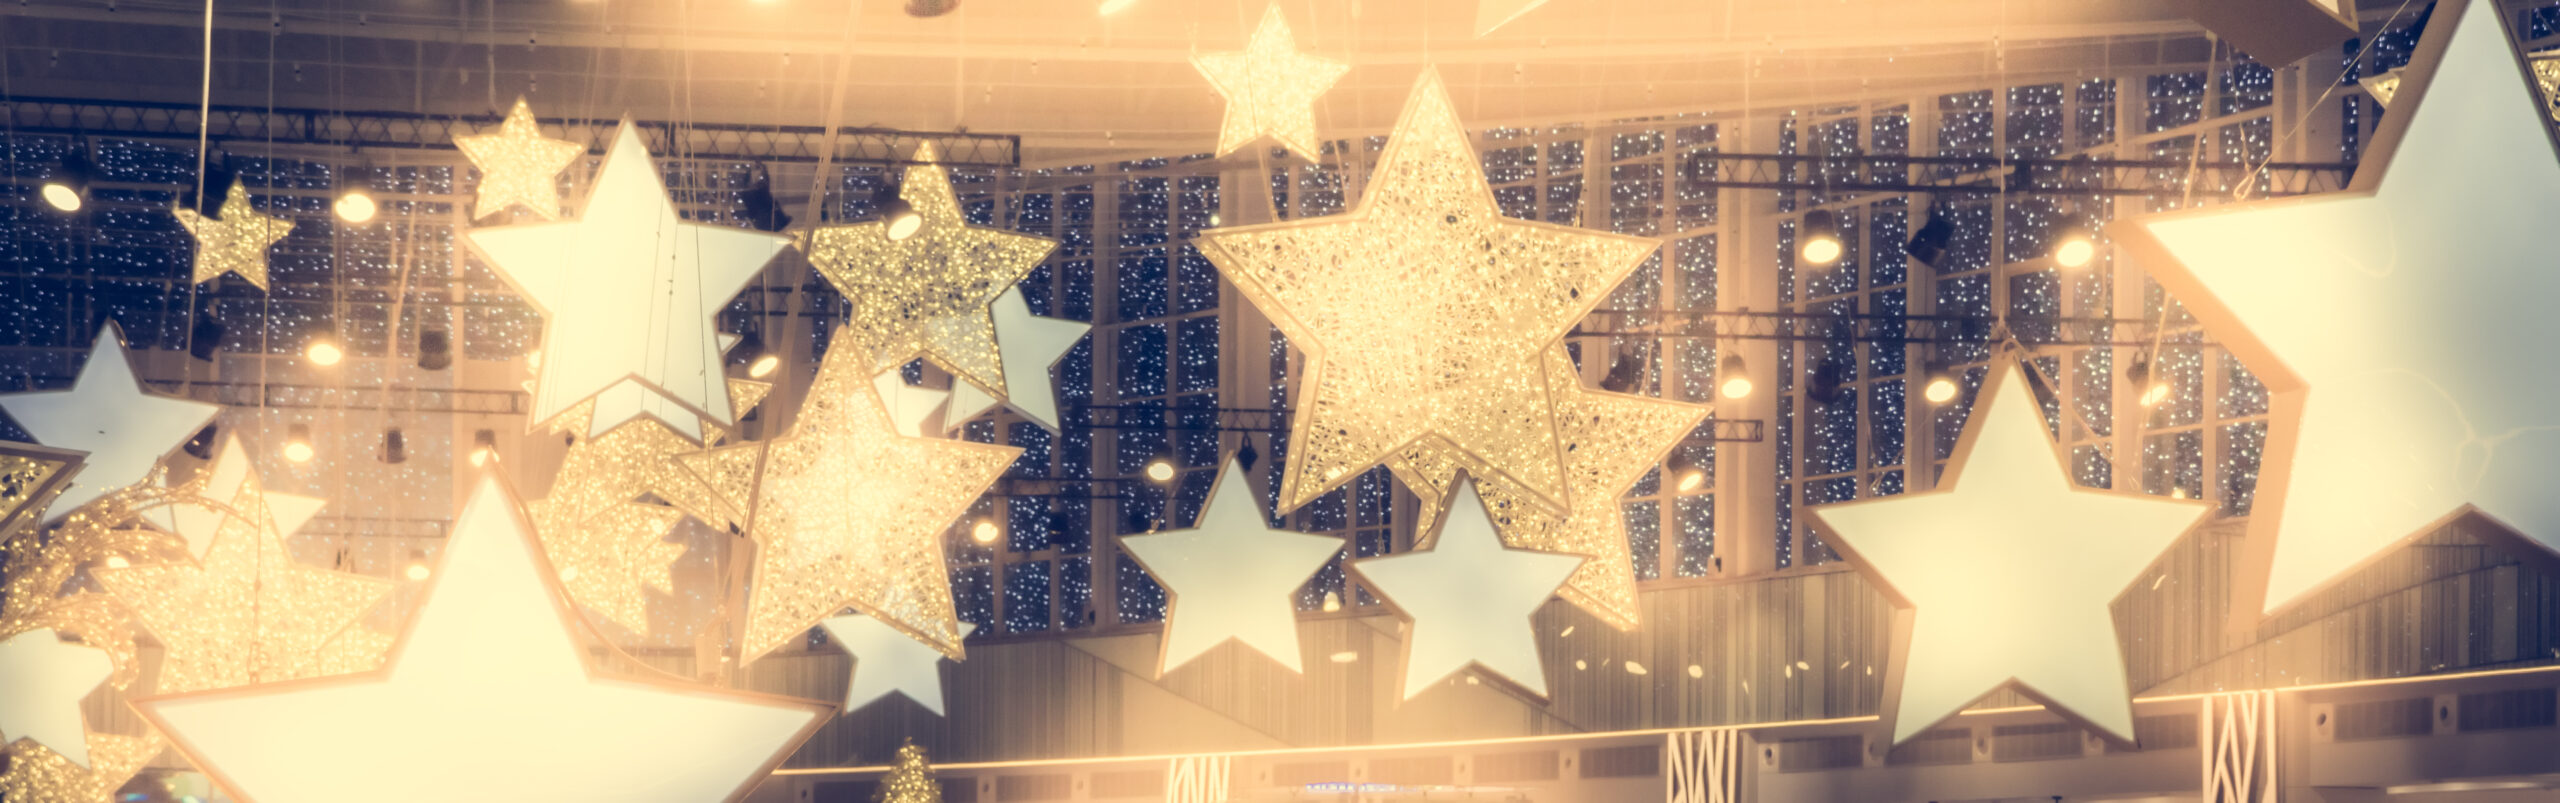 Stars,Shape,Show,Celebrity,Background,With,Spotlights,Soffits,Vintage,Yellow